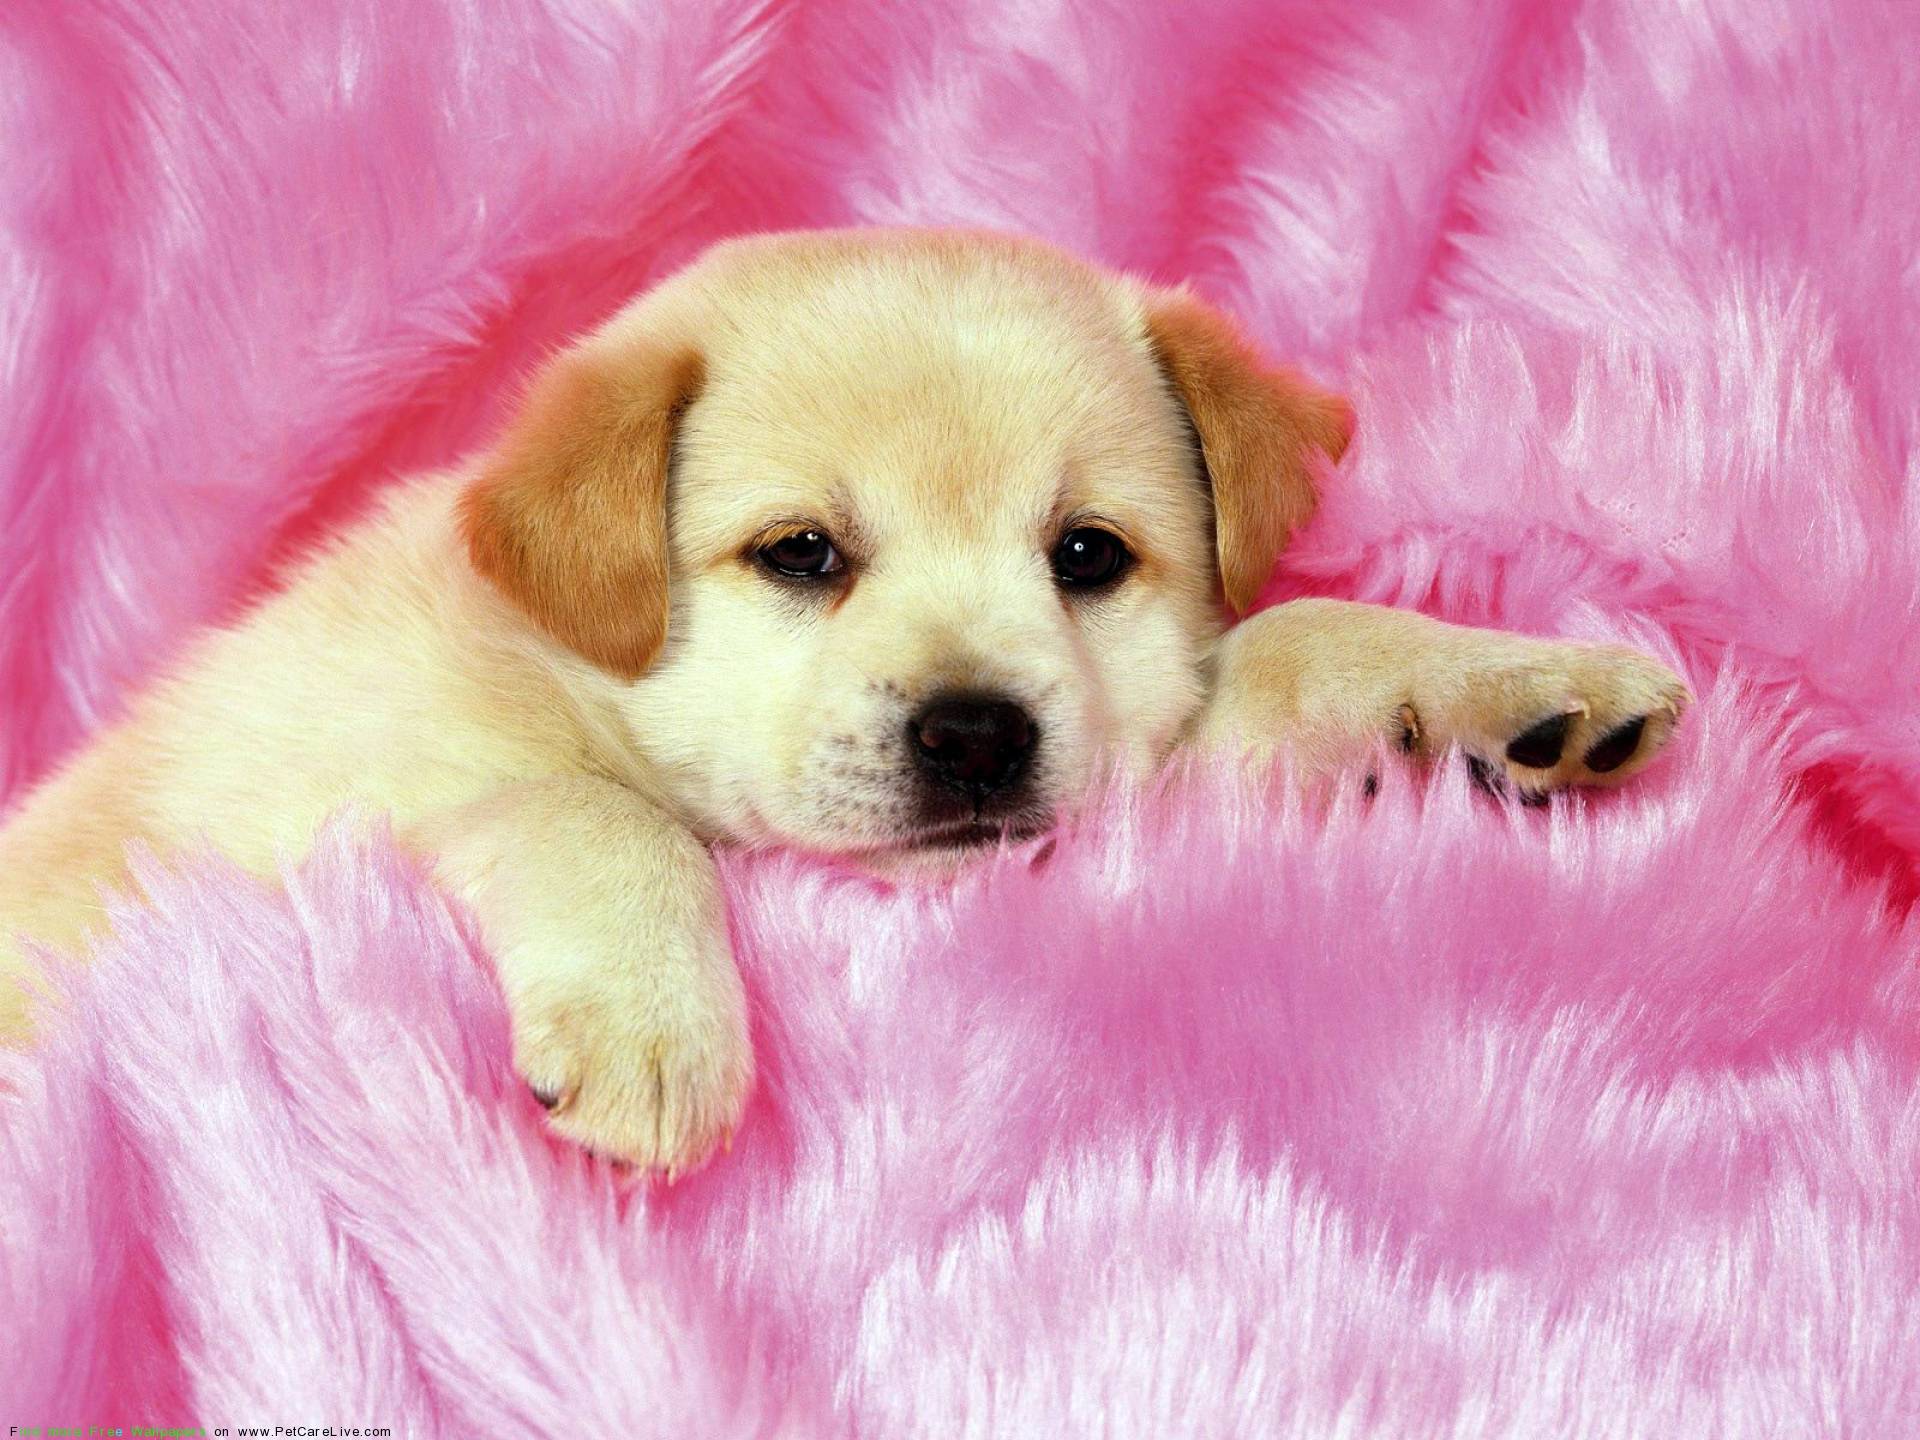 cute puppies wallpaper background. Funny picture photo, funny